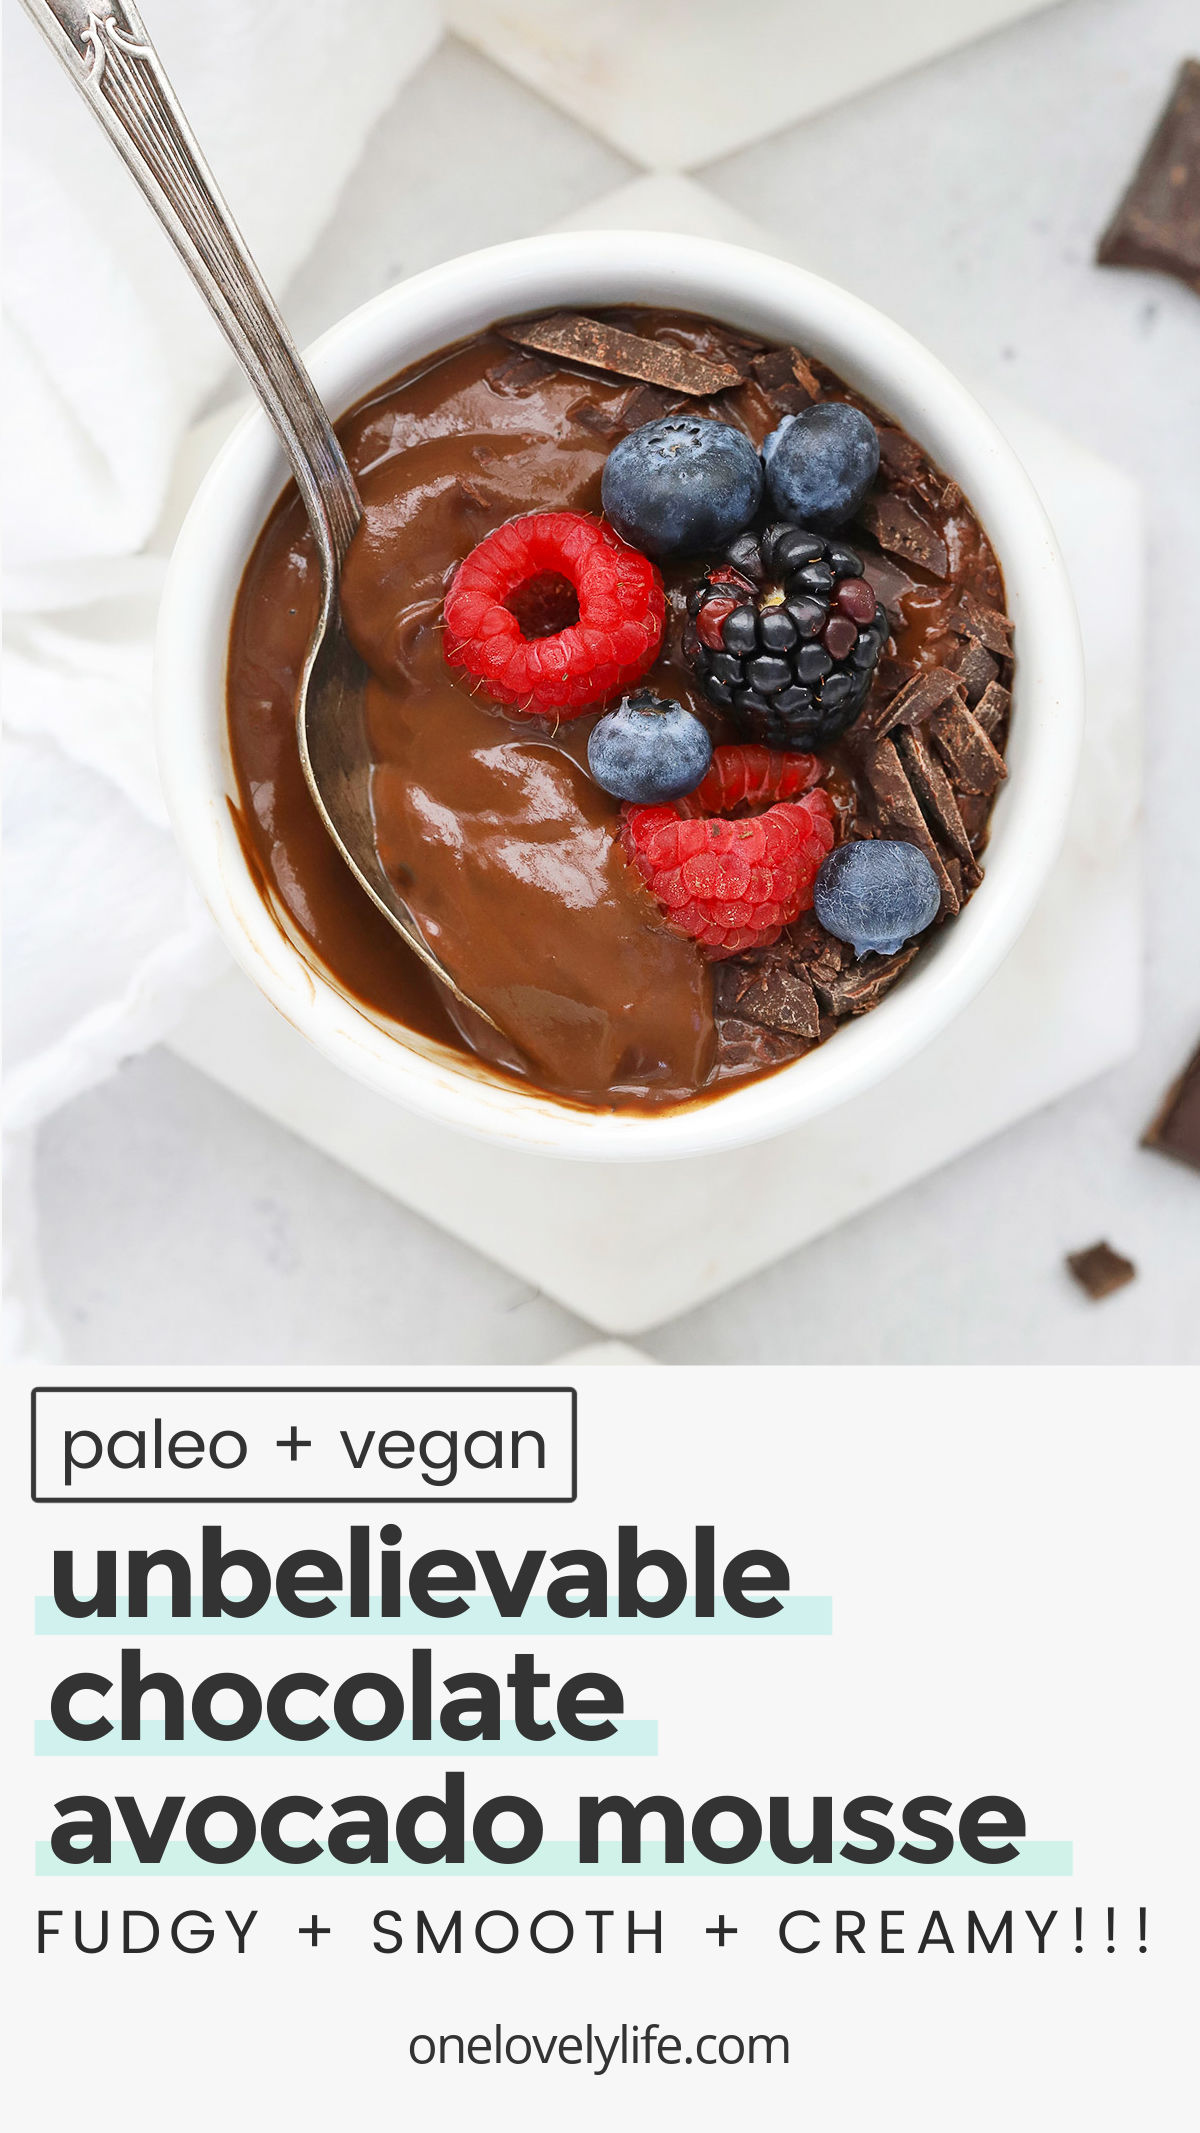 Chocolate Avocado Mousse - This velvety vegan chocolate mousse recipe has all the gorgeous flavor you're looking for and an ingredient list you're going to love! (Paleo, dairy-free). // paleo chocolate mousse // healthy chocolate mousse // dairy-free chocolate mousse // Avocado Chocolate pudding // Healthy dessert // chocolate avocado pudding // healthy pudding // healthy mousse recipe // healthy dessert // valentine's day dessert // no bake dessert recipe